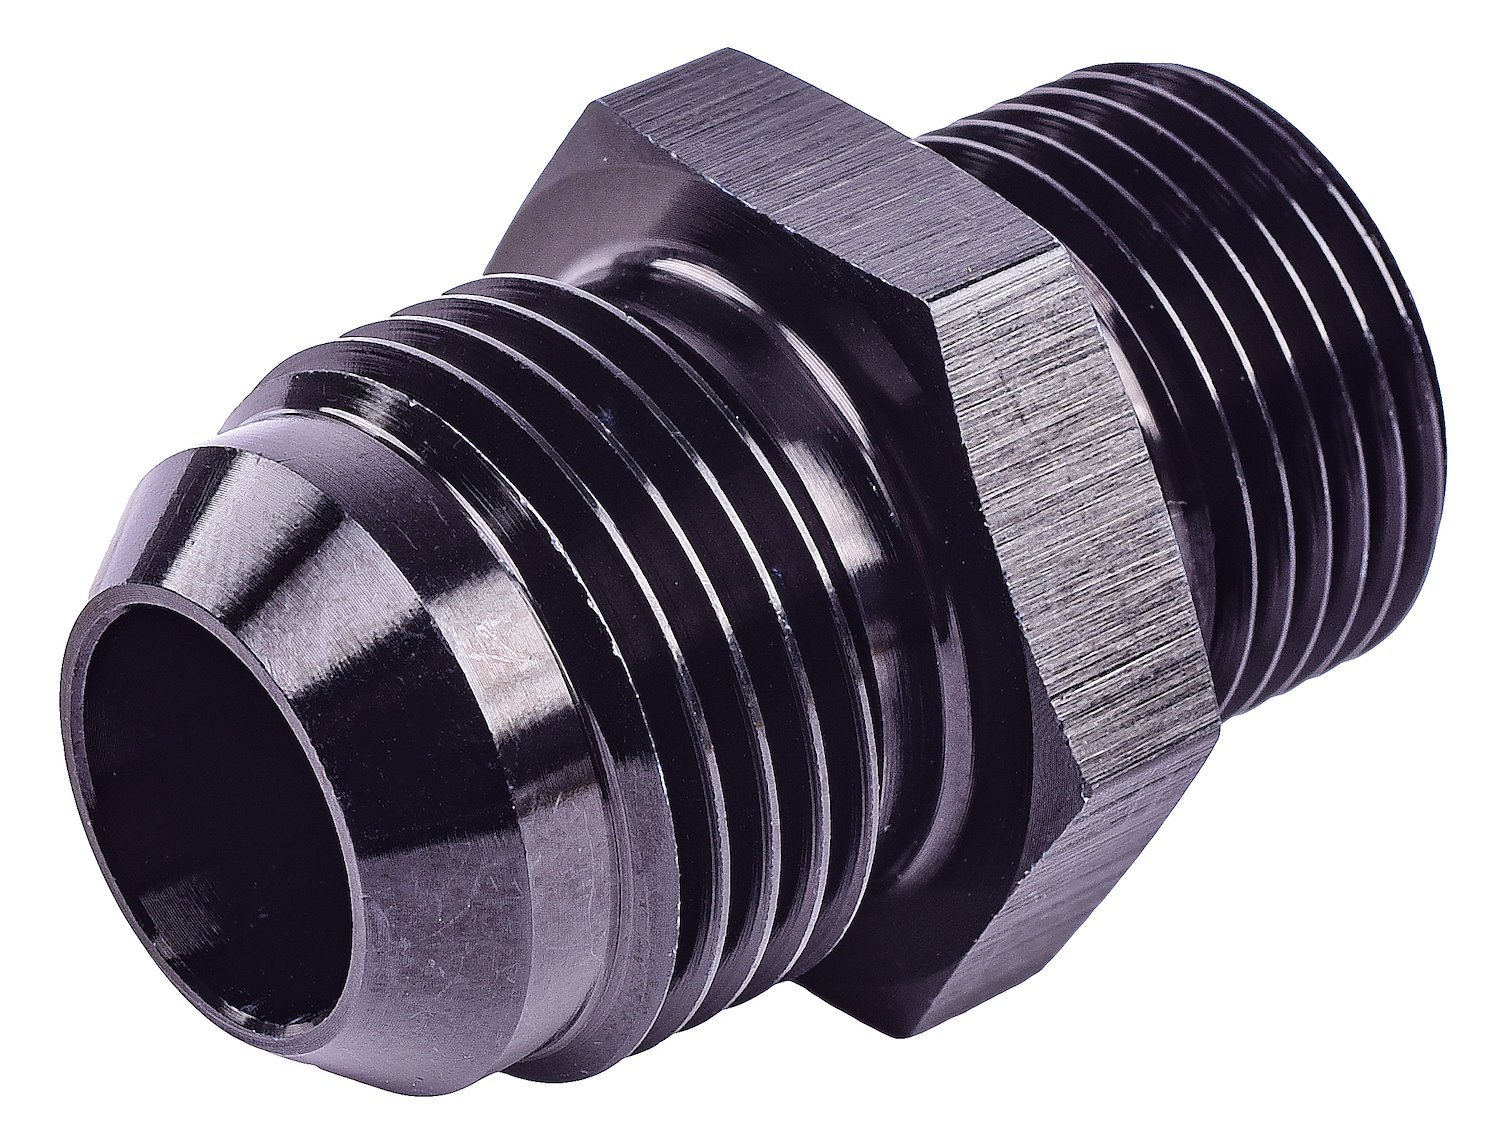 AN to Metric Adapter Fitting [-10 AN Male to 20mm x 1.5 Male]